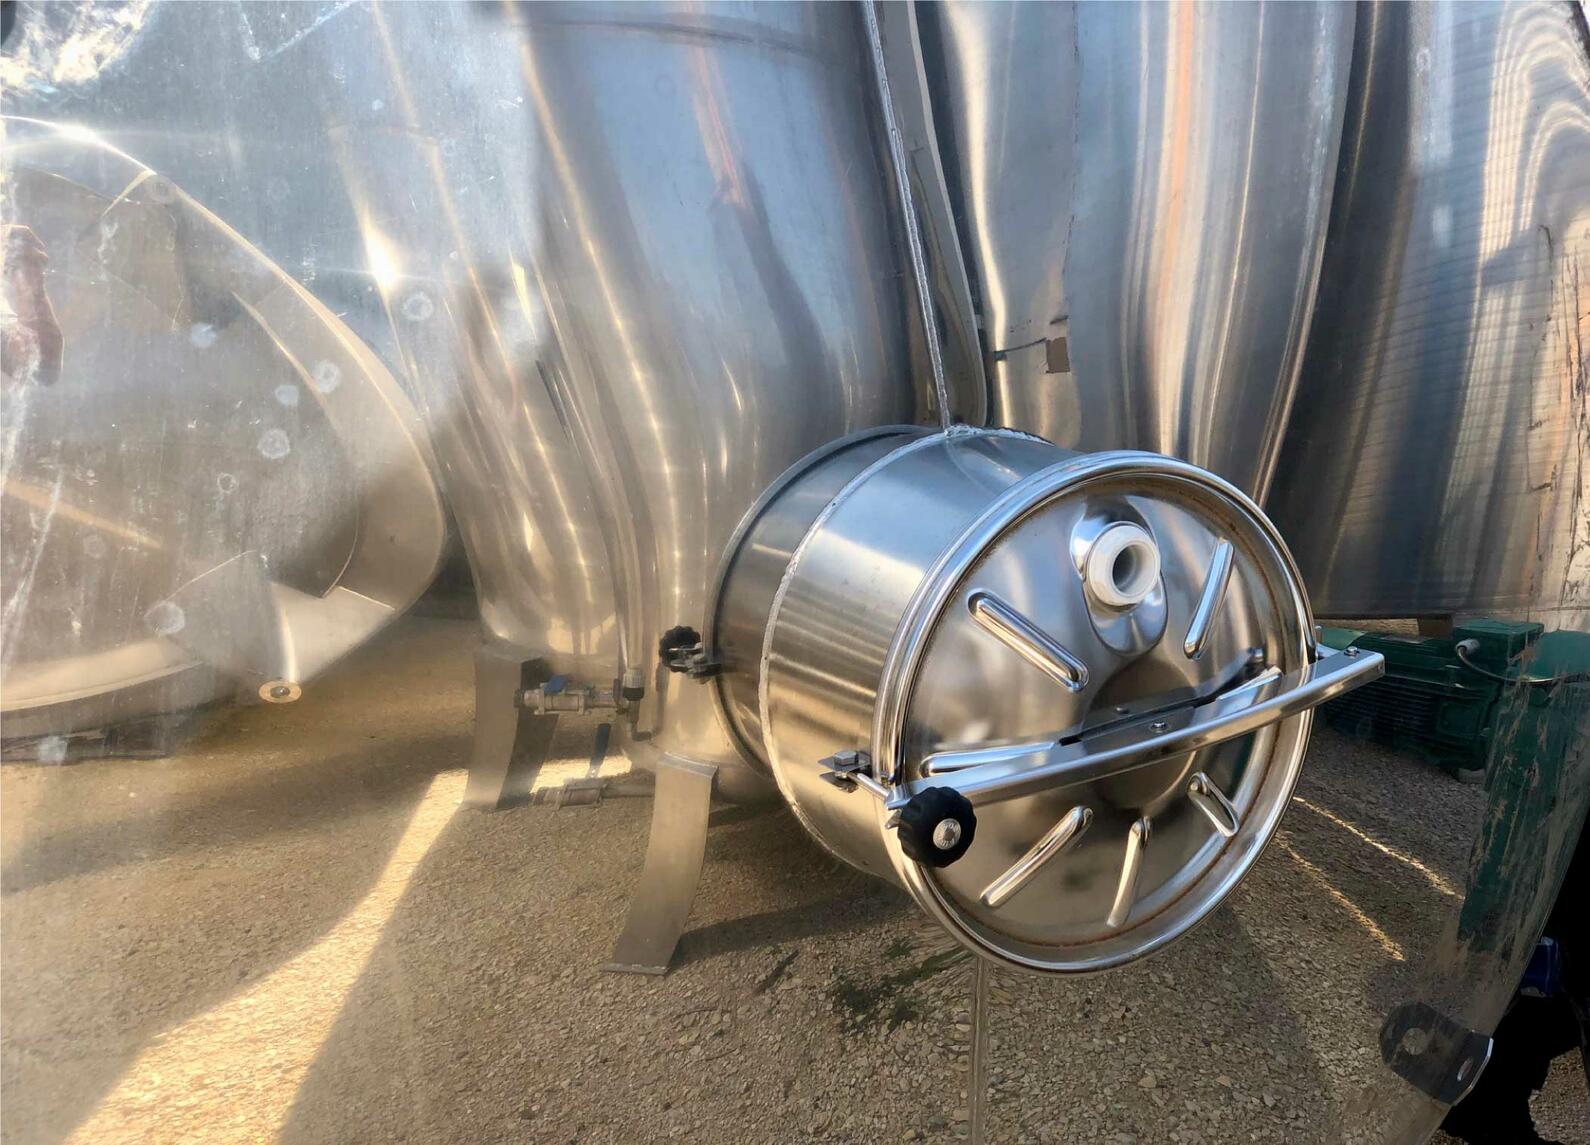 304 stainless steel tank - Closed - STOIPSER7500B